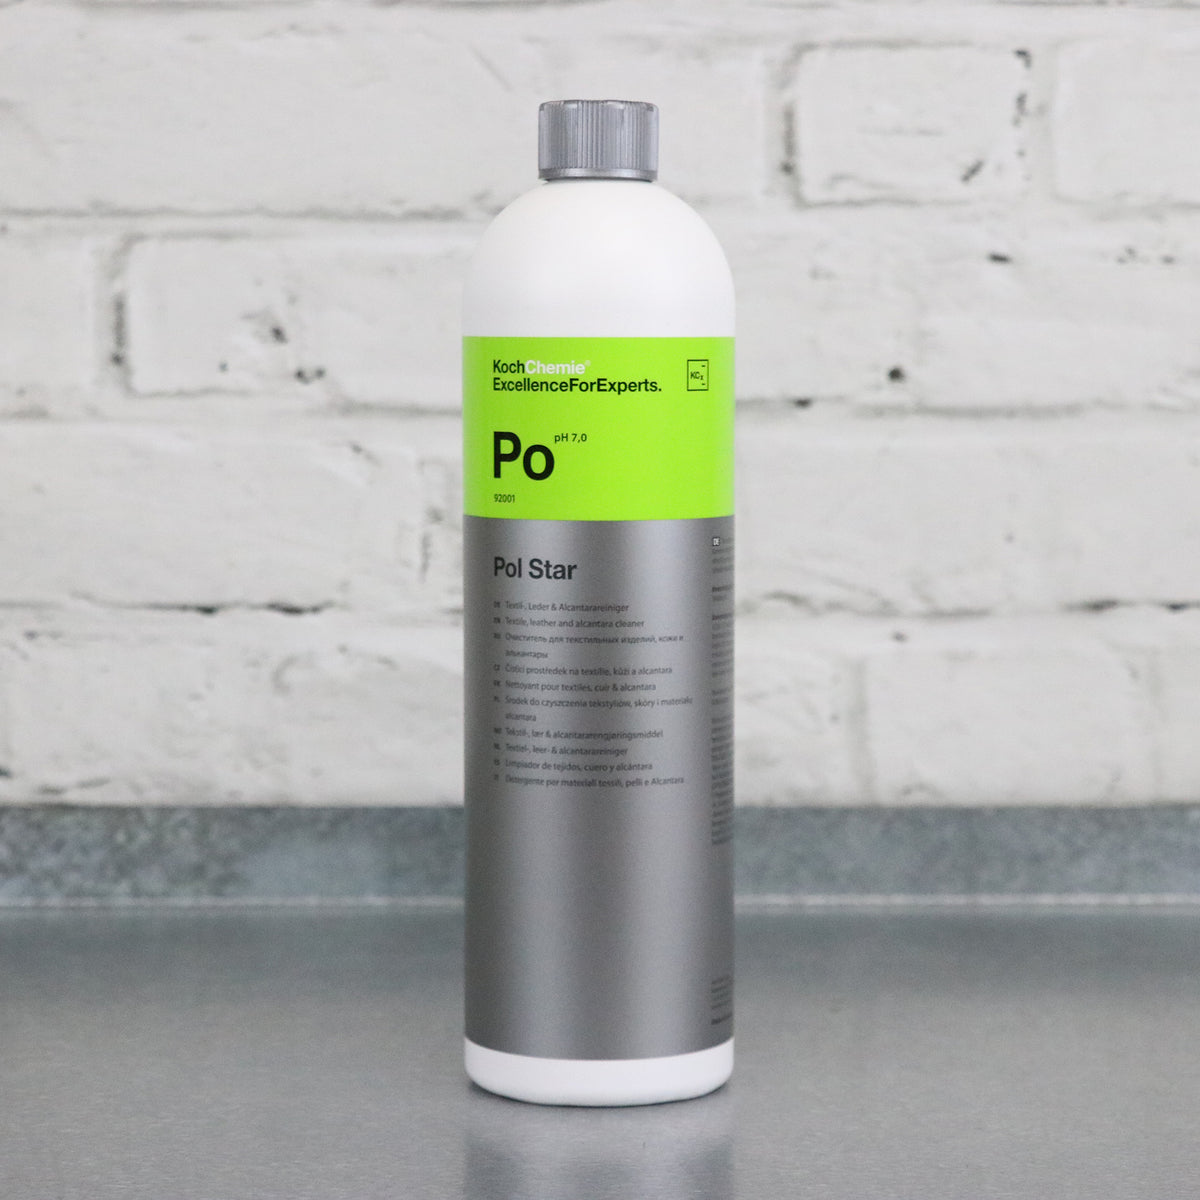 Koch-Chemie PO Pol Star Textile & Leather Cleaner — Morelli Group